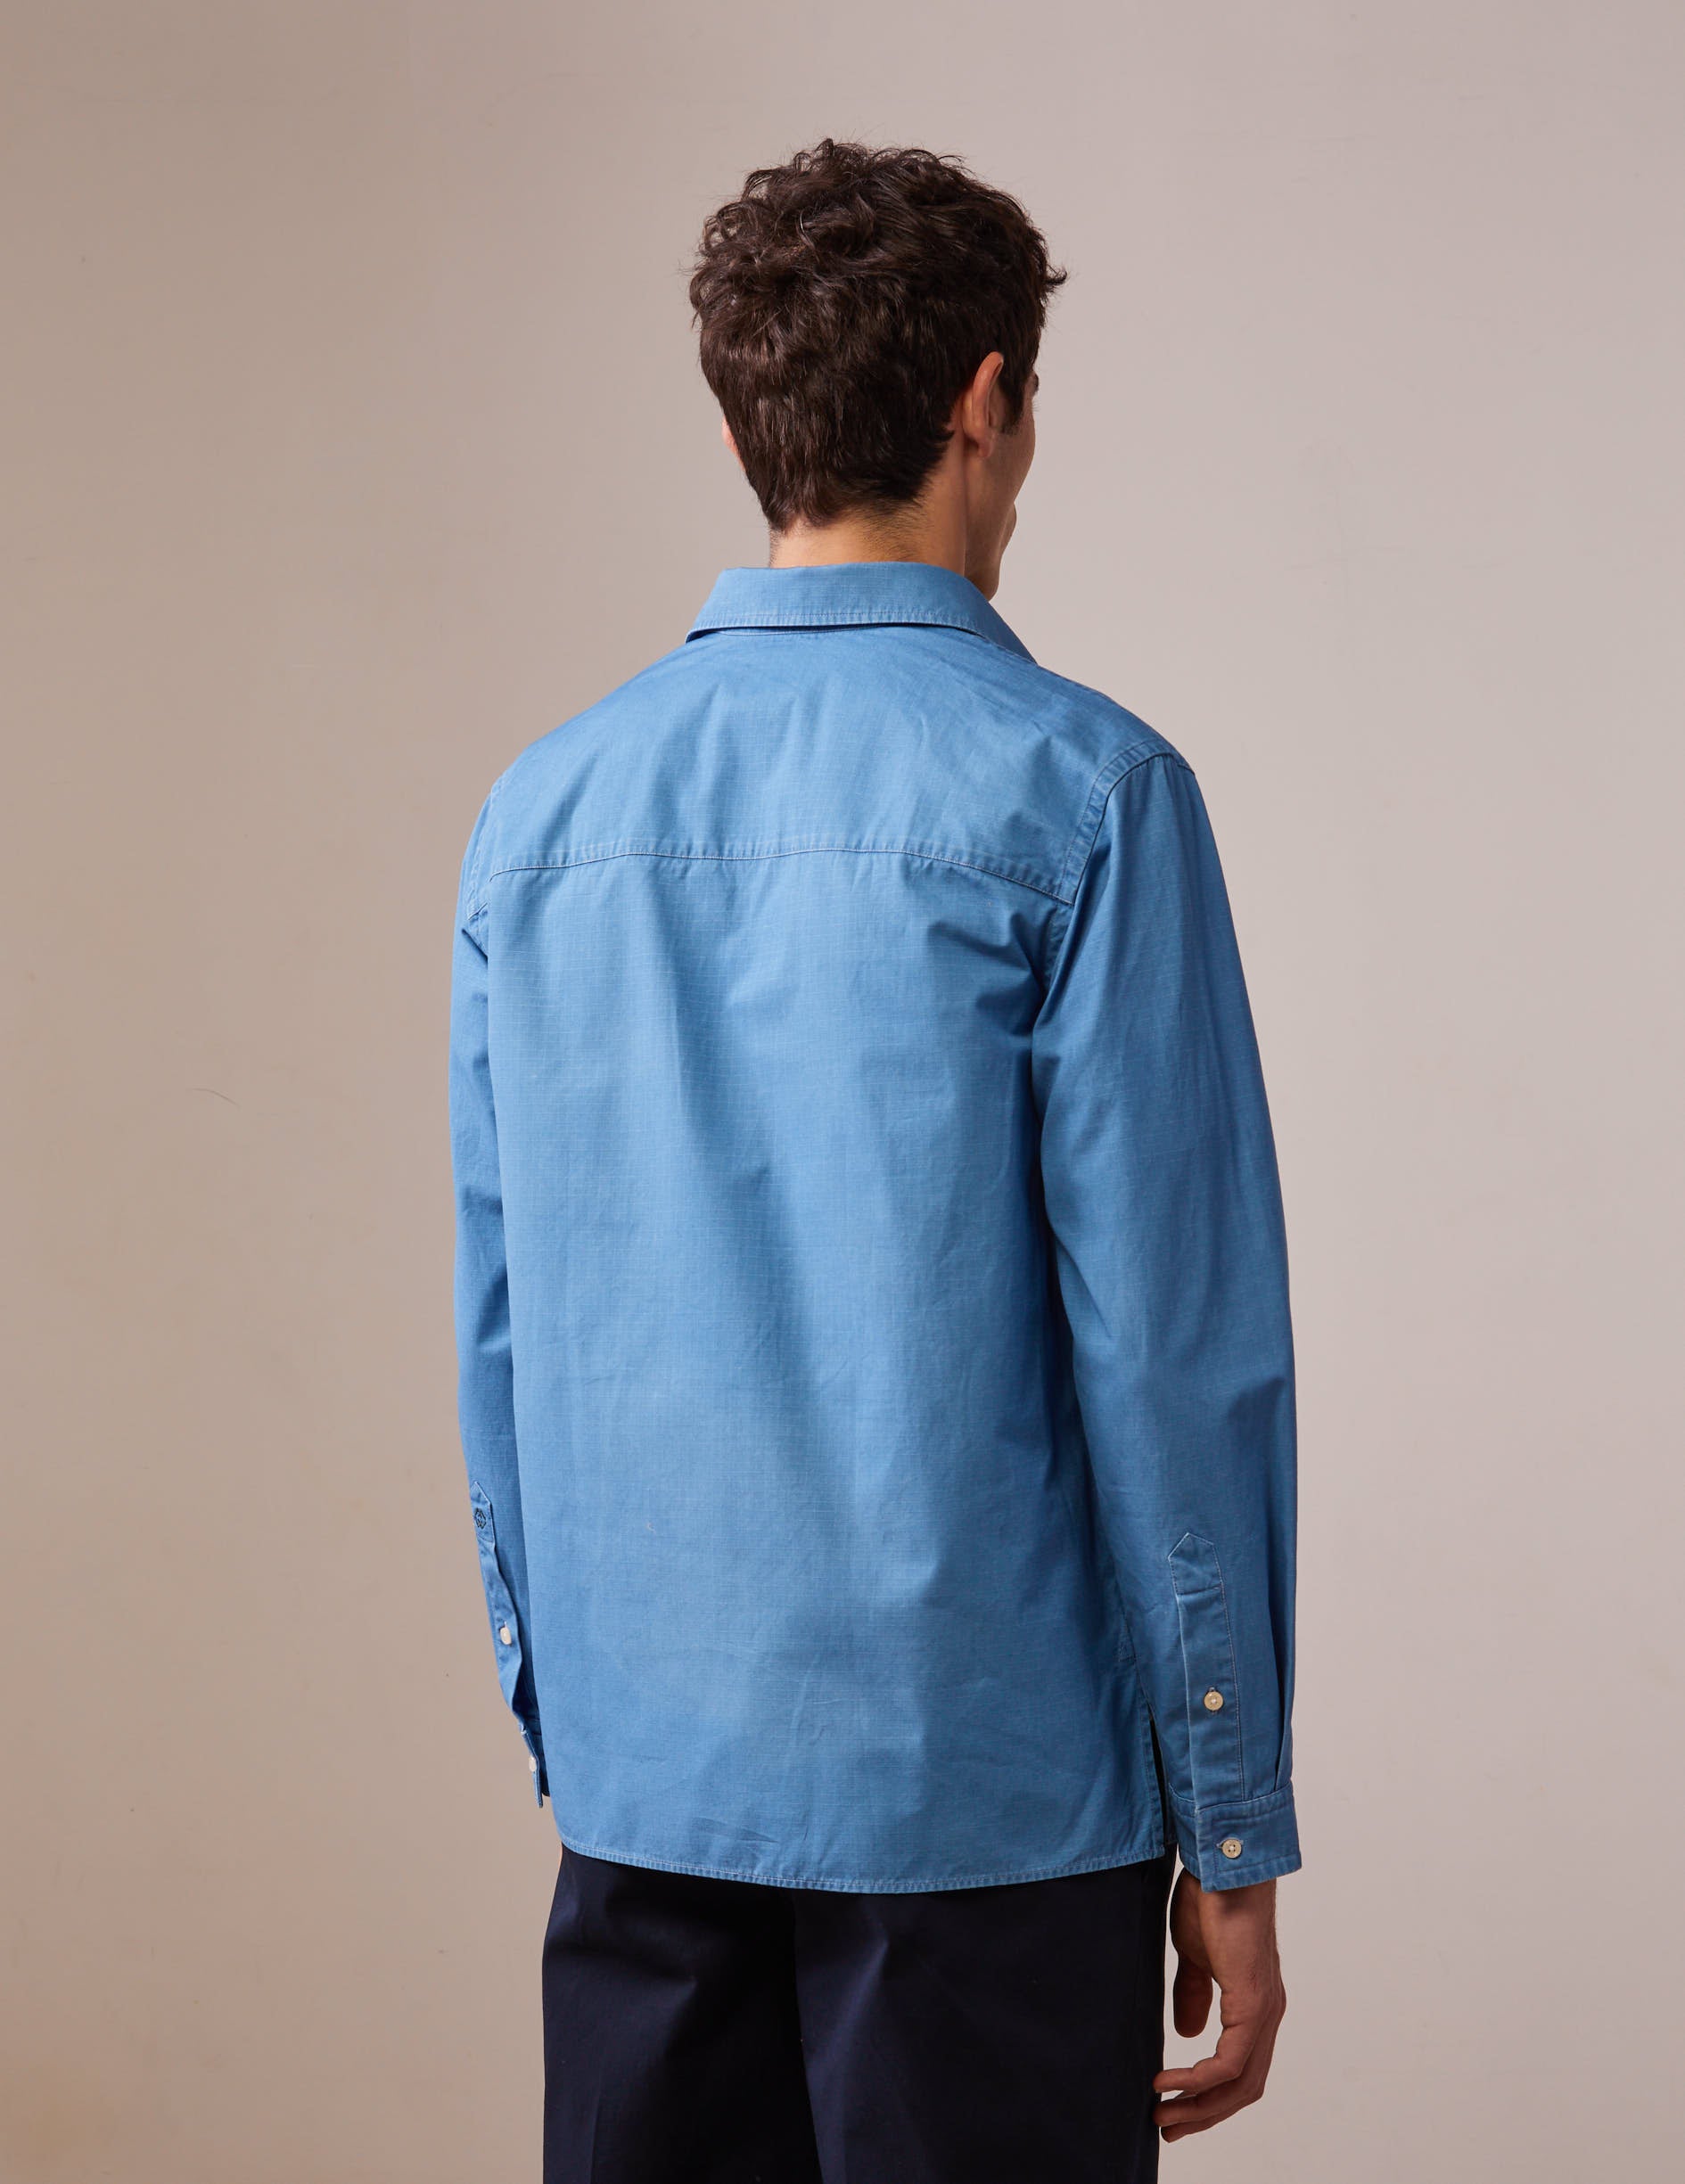 Florian shirt in light blue ripstop - Ripstop - French Collar